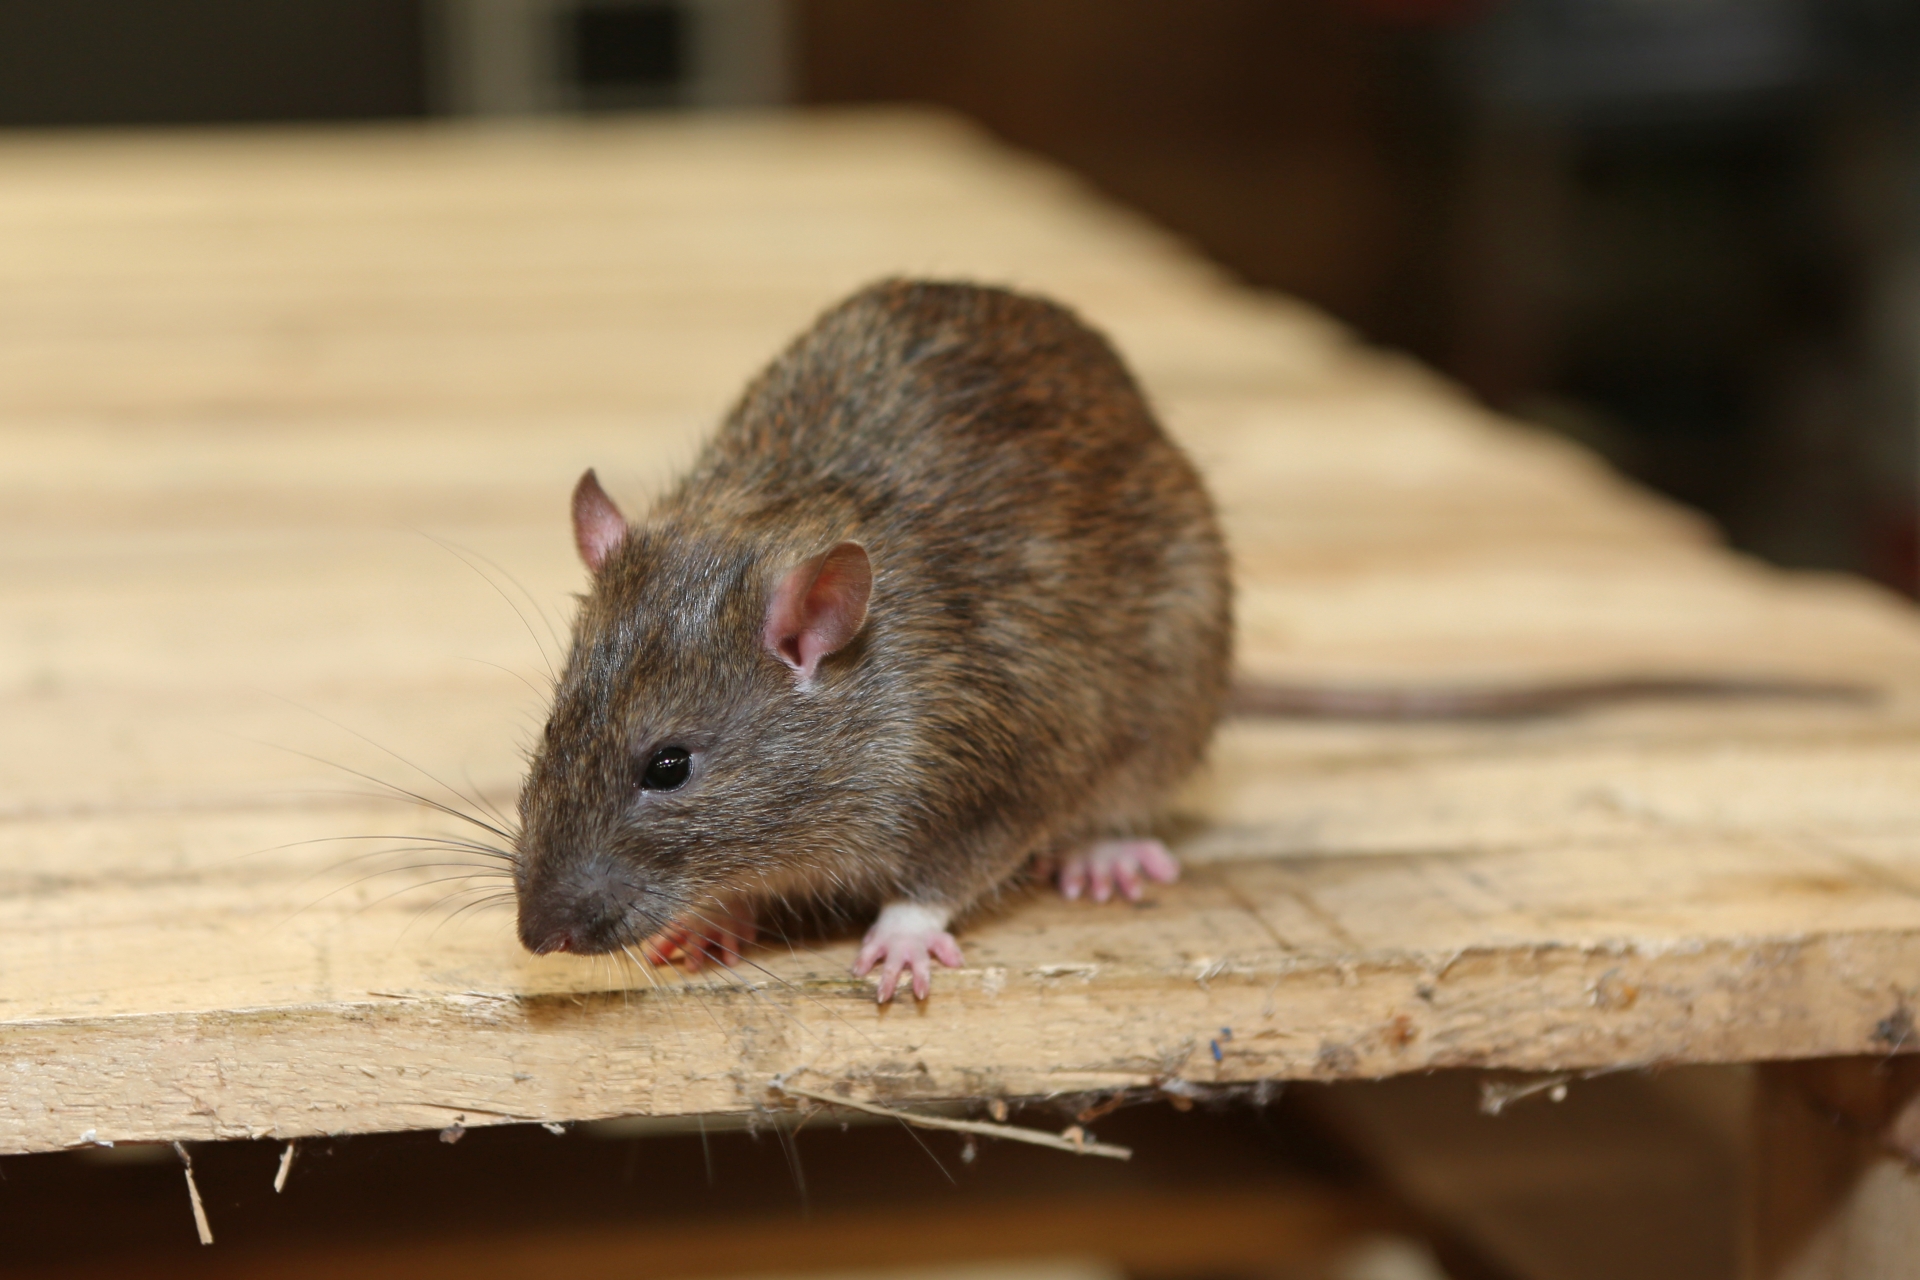 Rat Control, Pest Control in West Wickham, BR4. Call Now 020 8166 9746